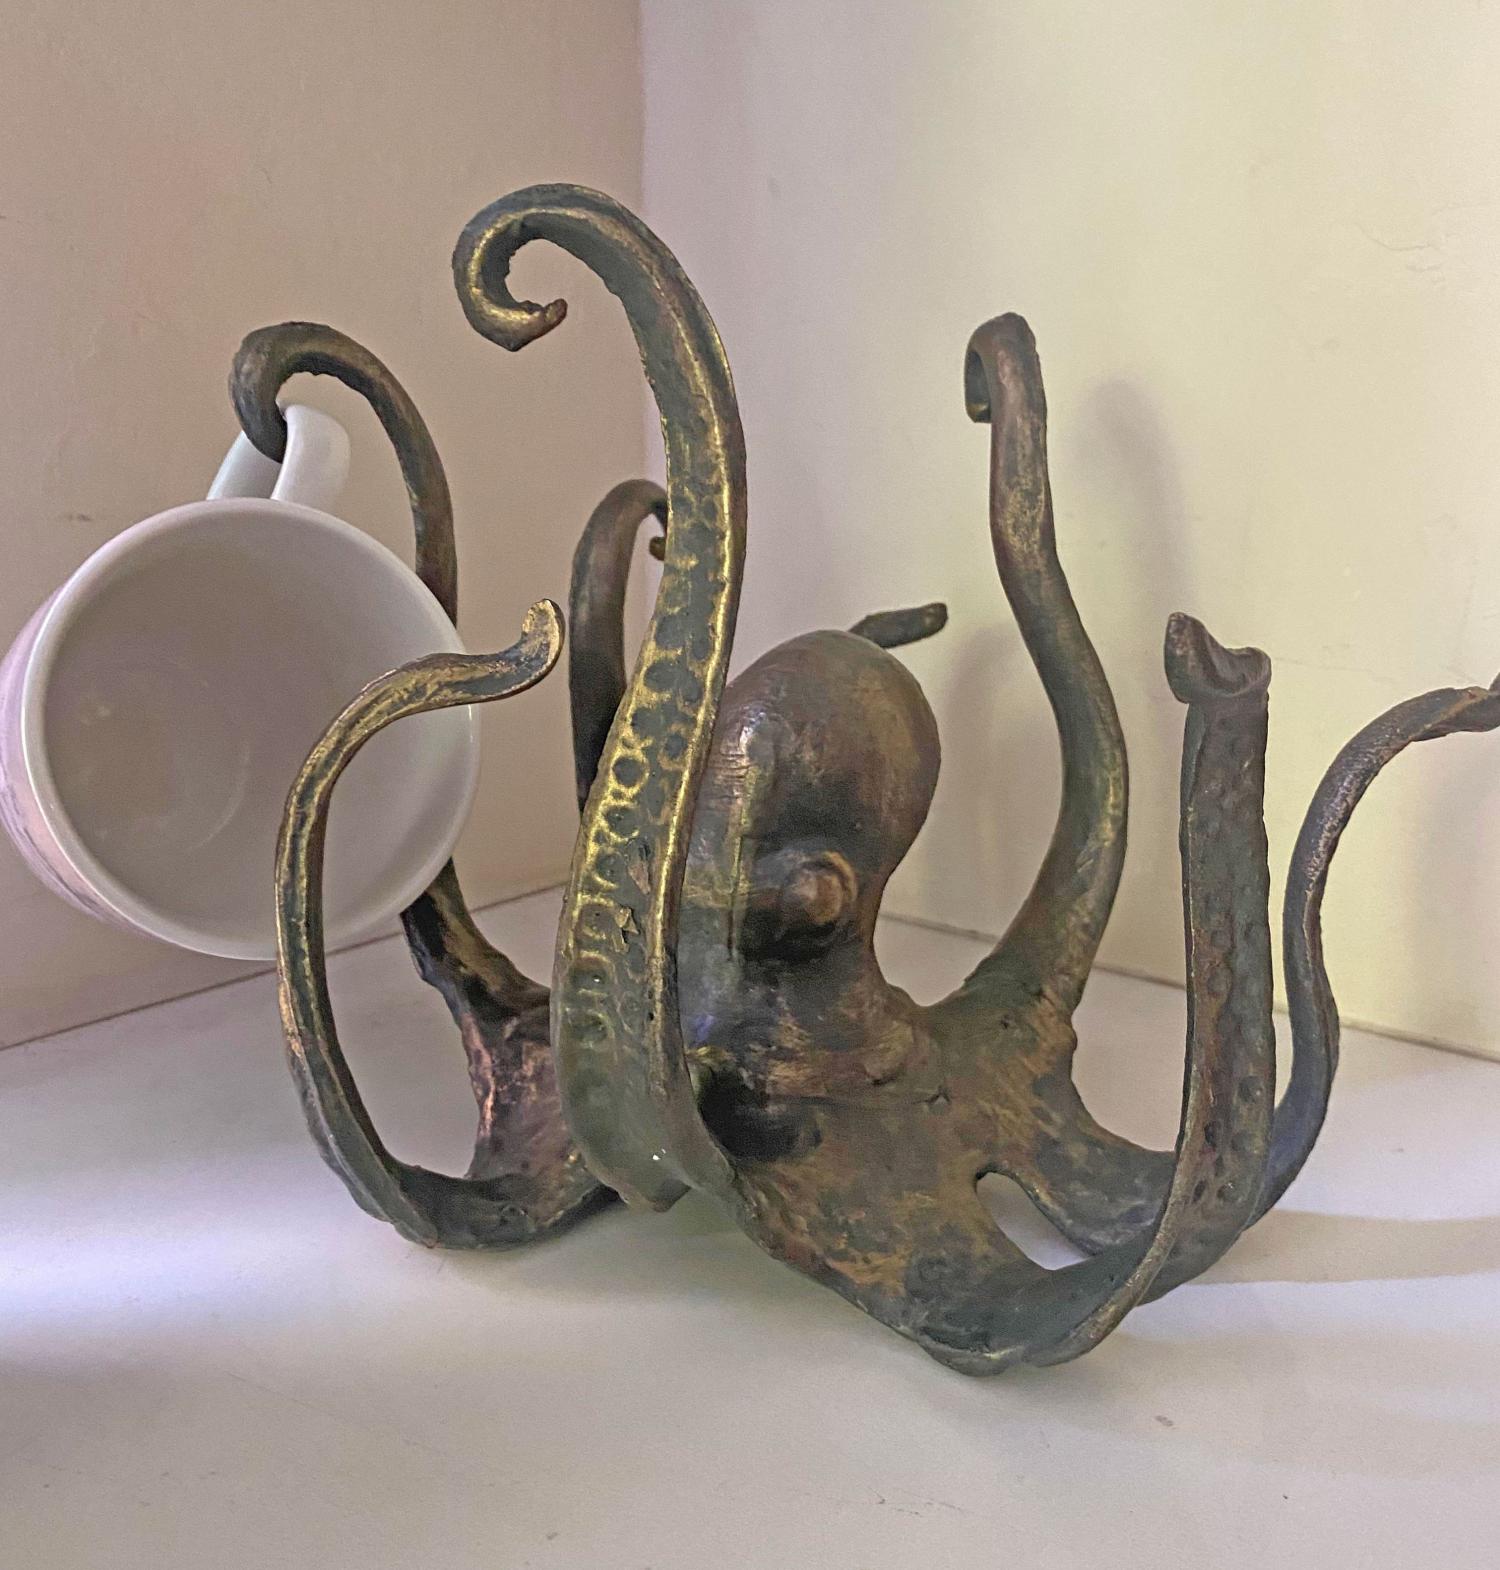 Rusty golden brown colored Octopus Coffee Mug Holder on a white kitchen top